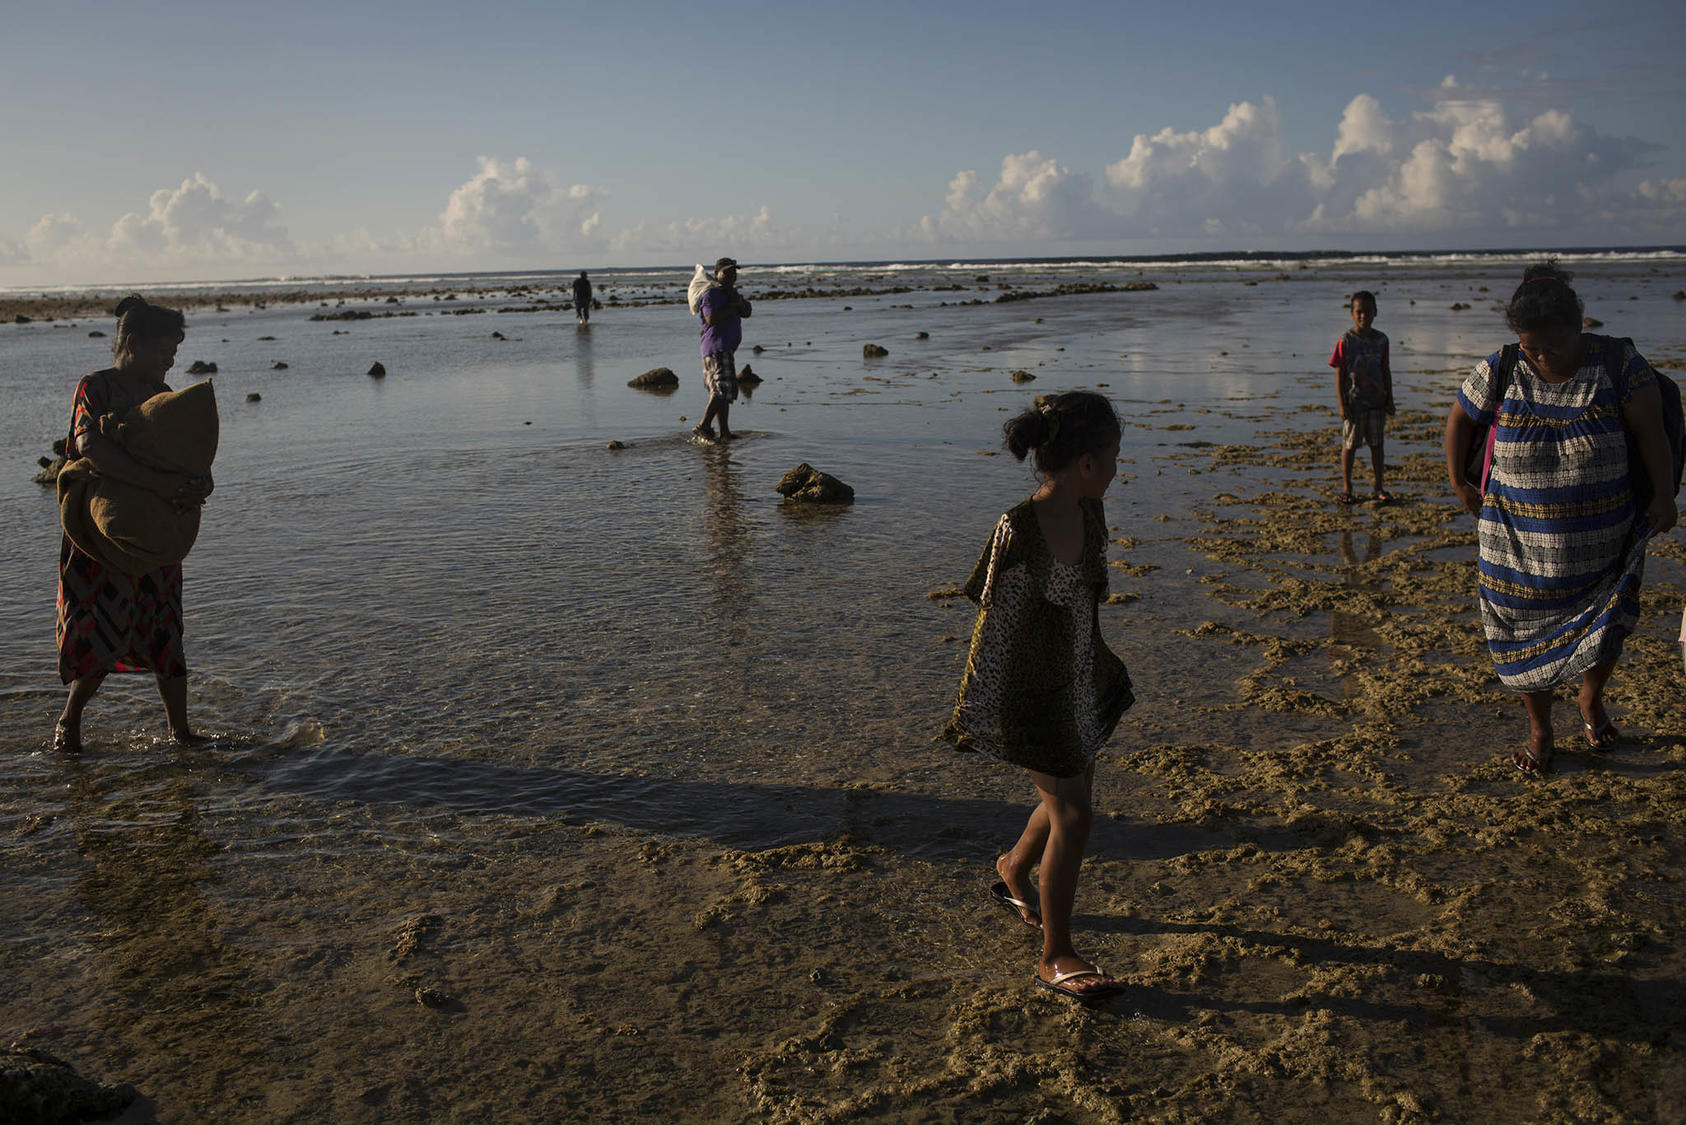 Residents cross between islands during a rising tide on Majuro, Marshall Islands, on Nov. 4, 2015. Majuro is home to former residents of Bikini Atoll who were relocated in the 1940s. (Josh Haner/The New York Times)